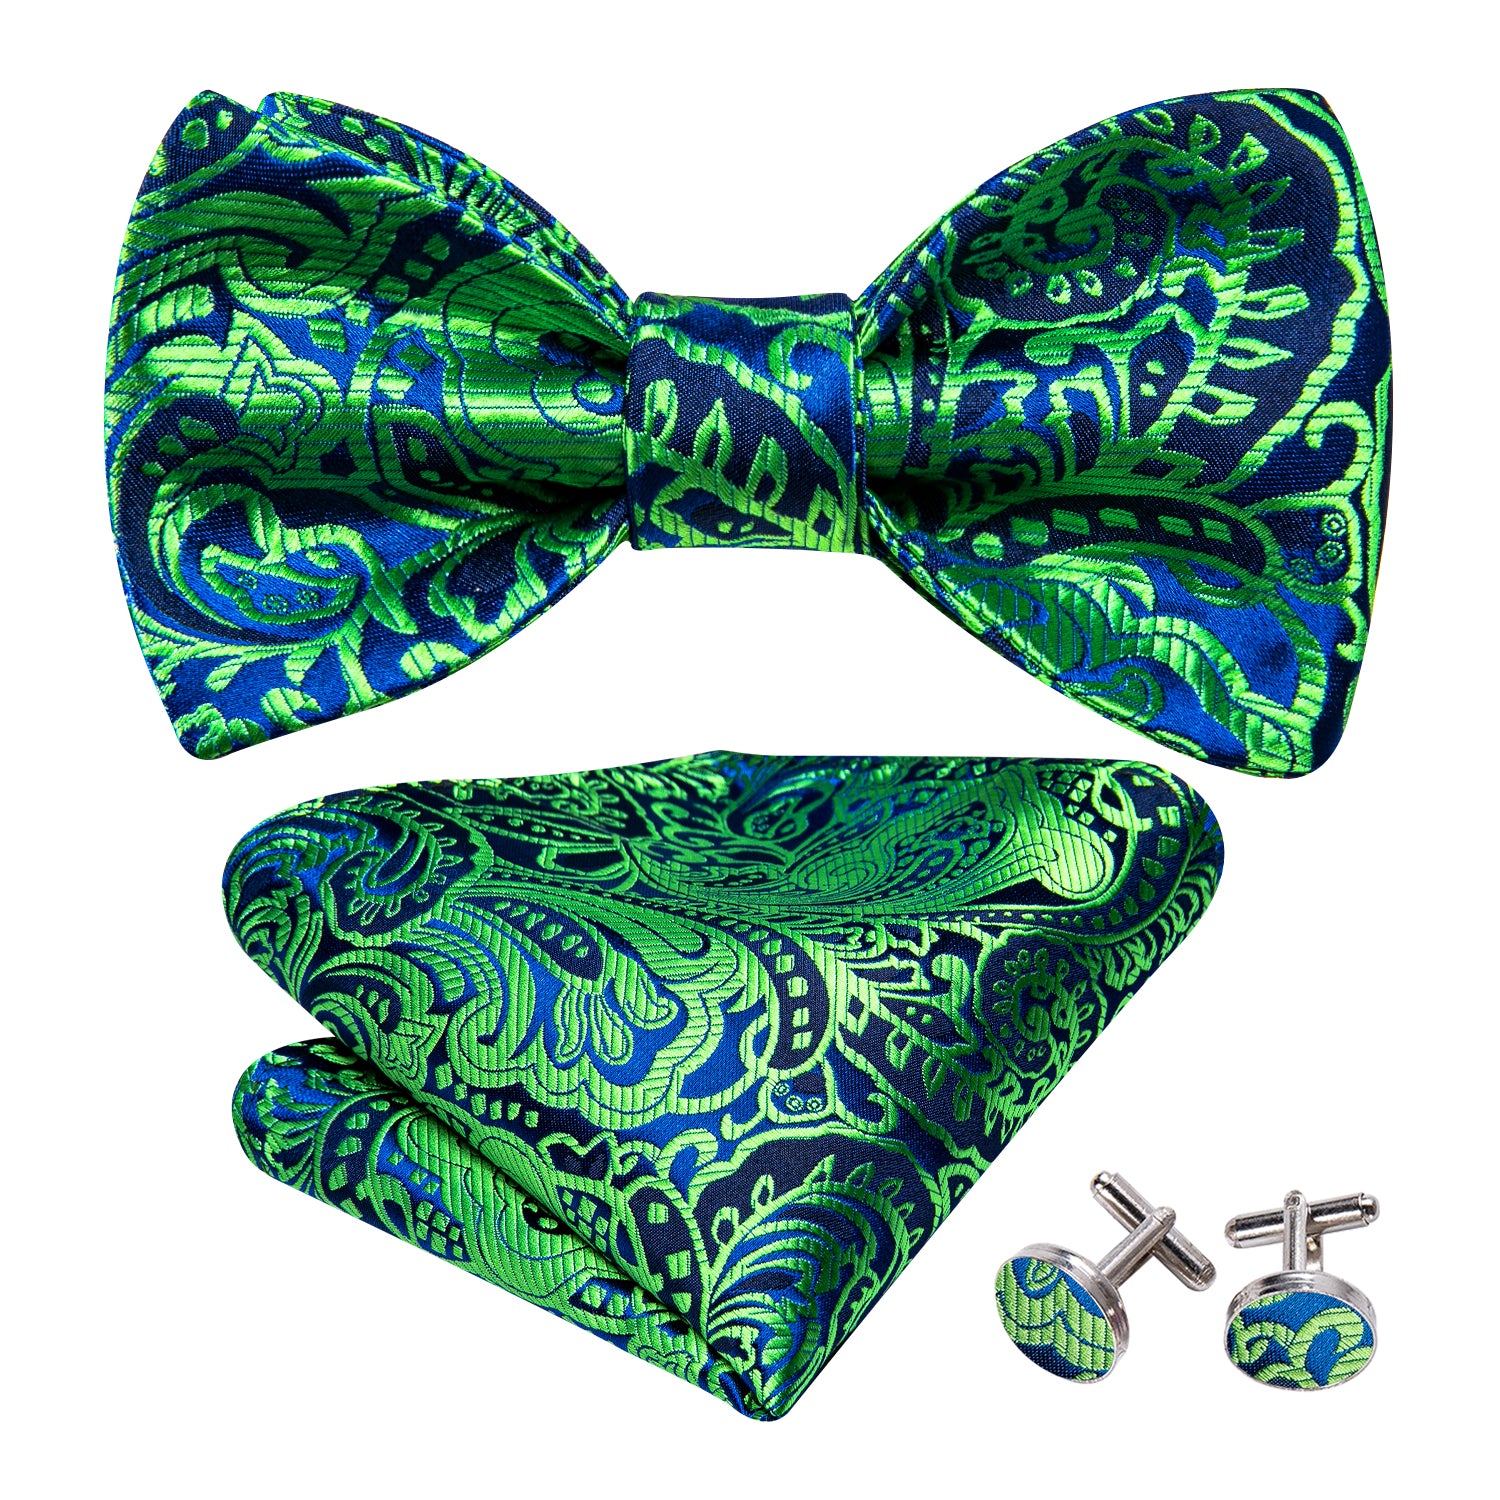 Barry.wang Floral Tie Blue Green Paisley Bow Tie Hanky Cufflinks Set